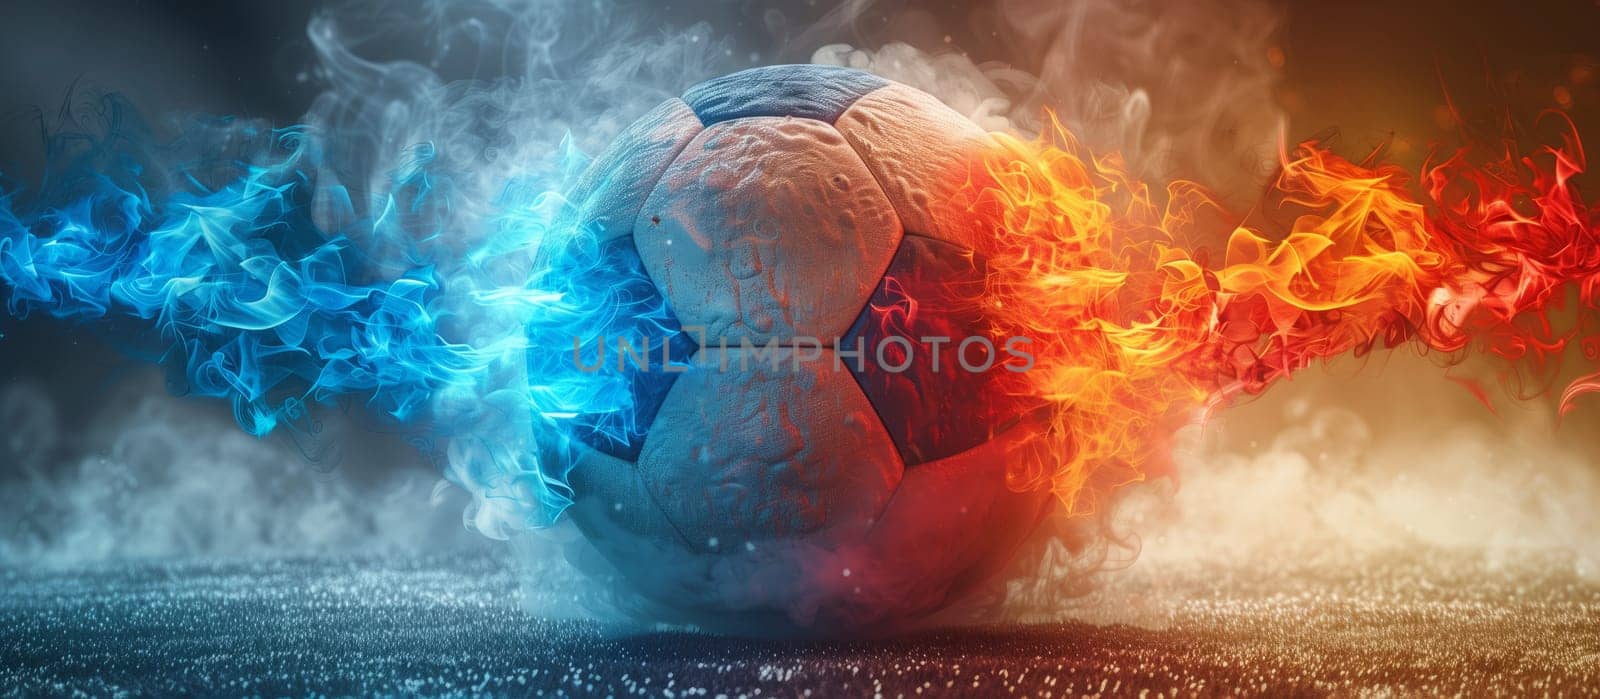 Soccer ball engulfed in flames and smoke against a backdrop of electric blue sky by richwolf